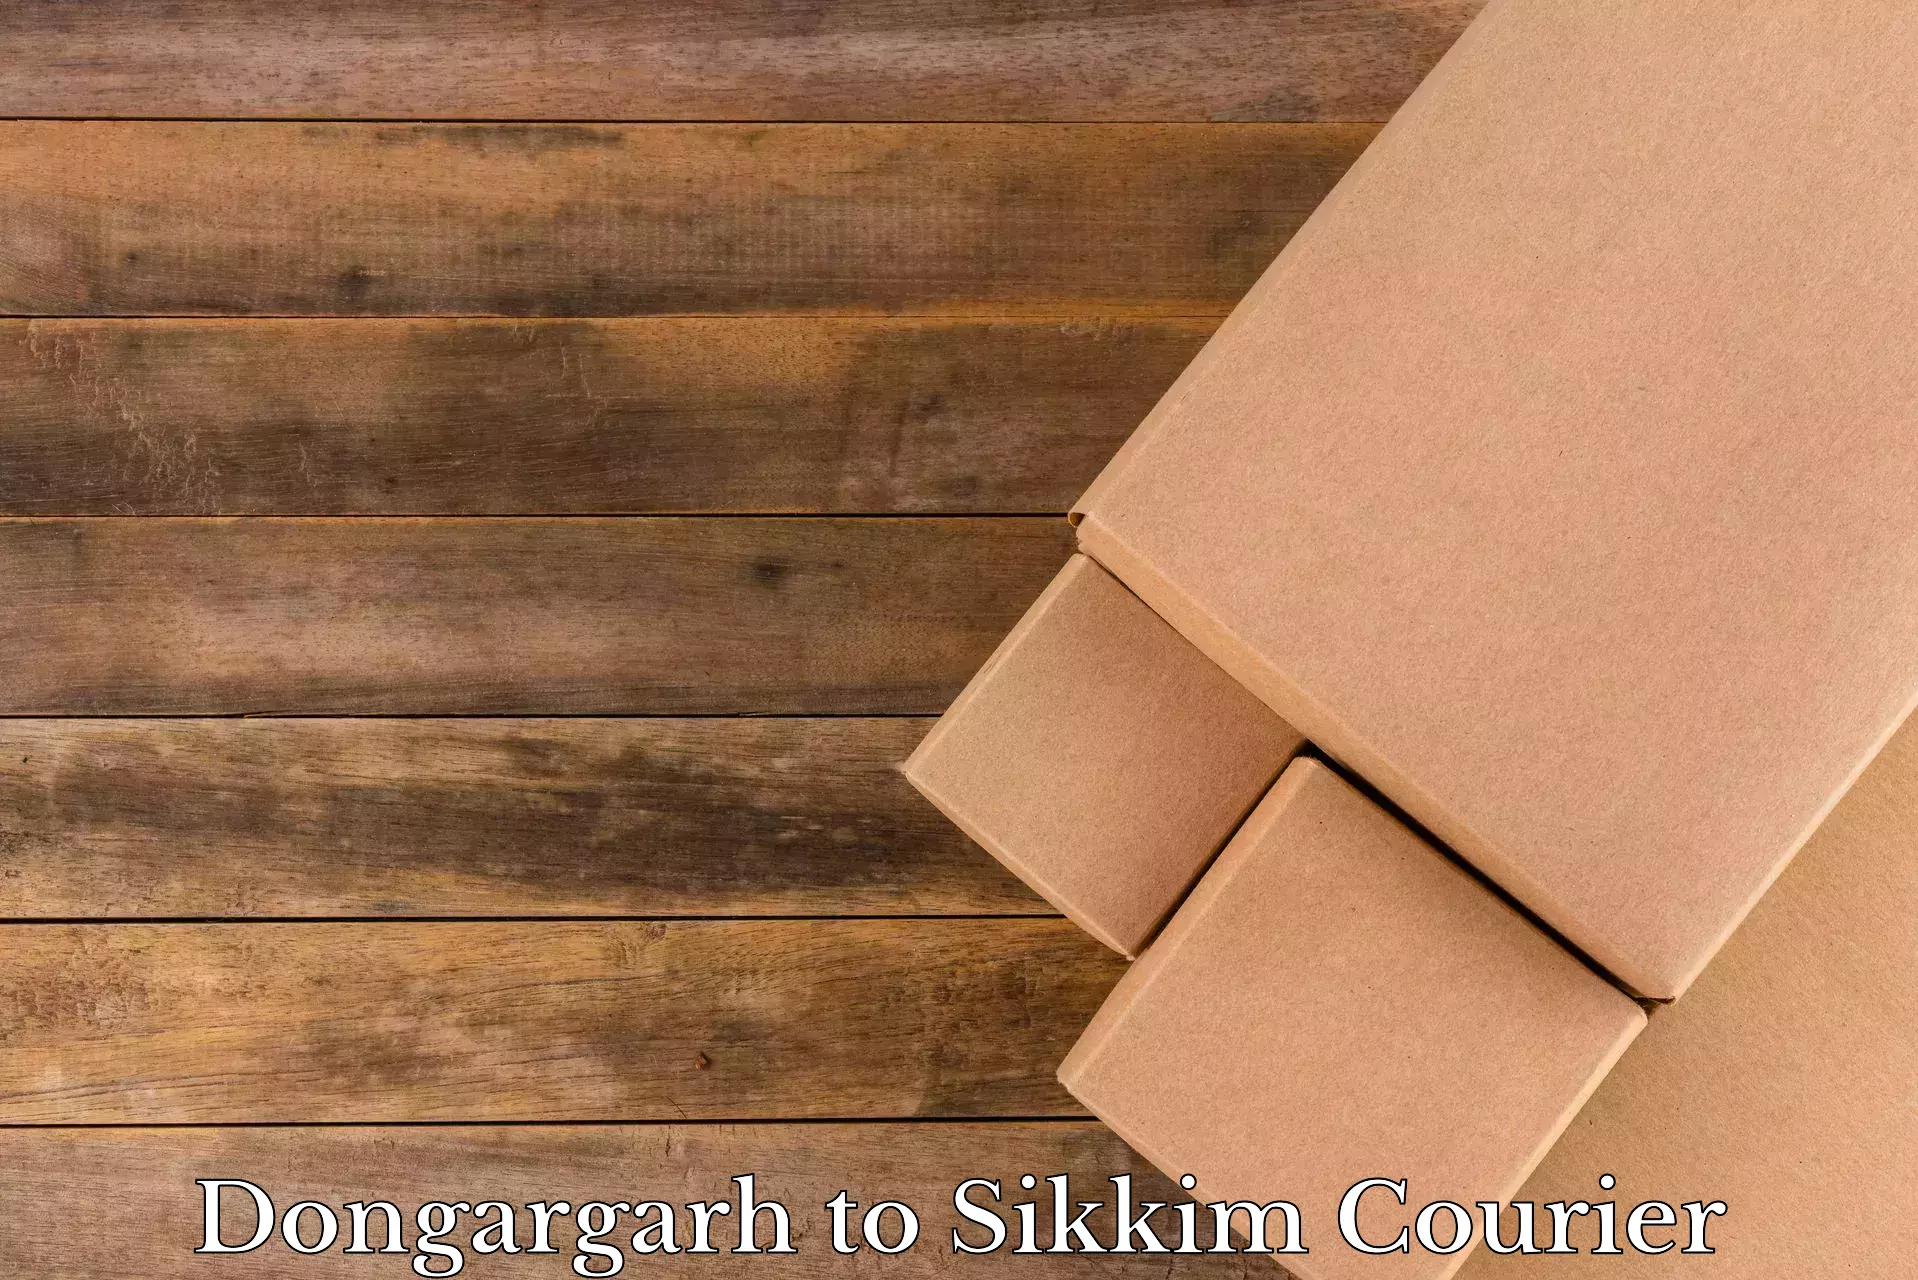 Efficient moving company Dongargarh to Sikkim